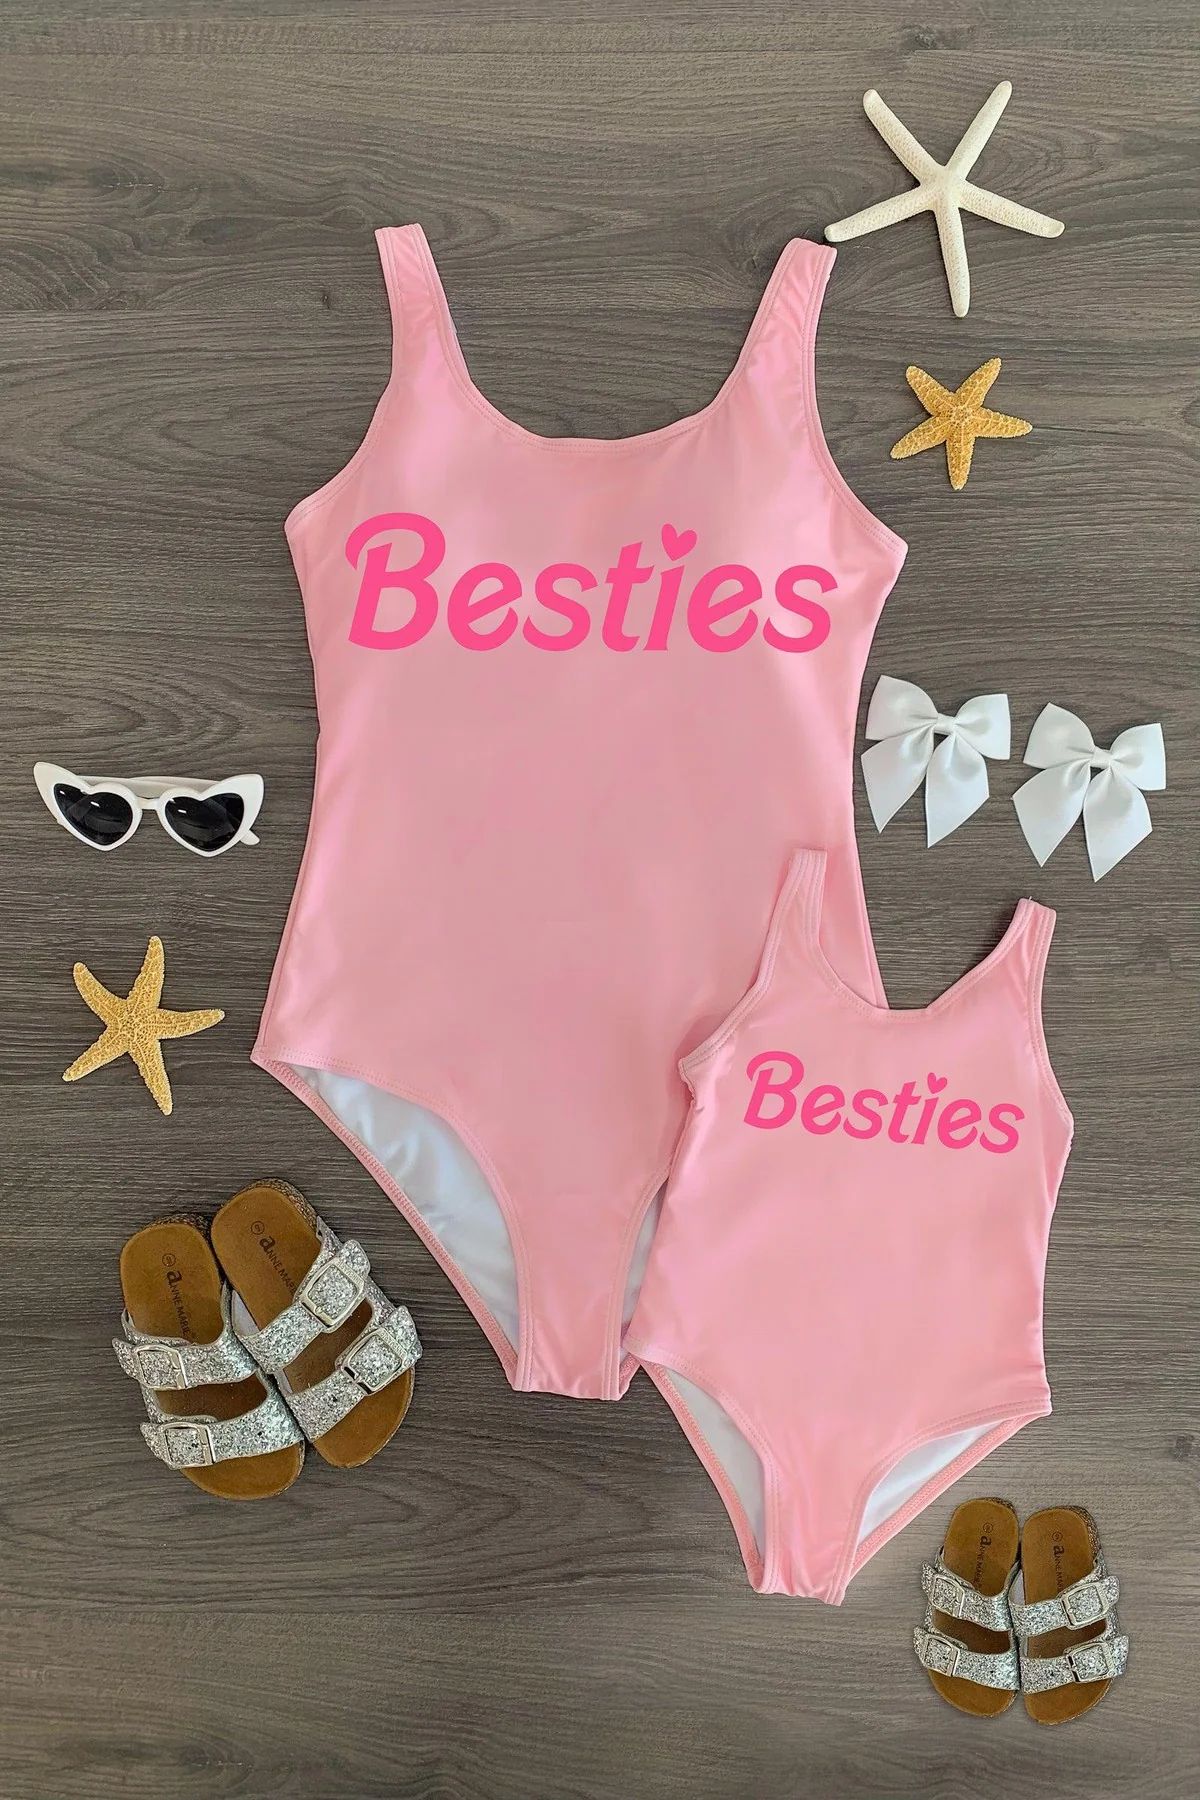 Mom & Me - "Besties" Pink One Piece Swimsuit | Sparkle In Pink